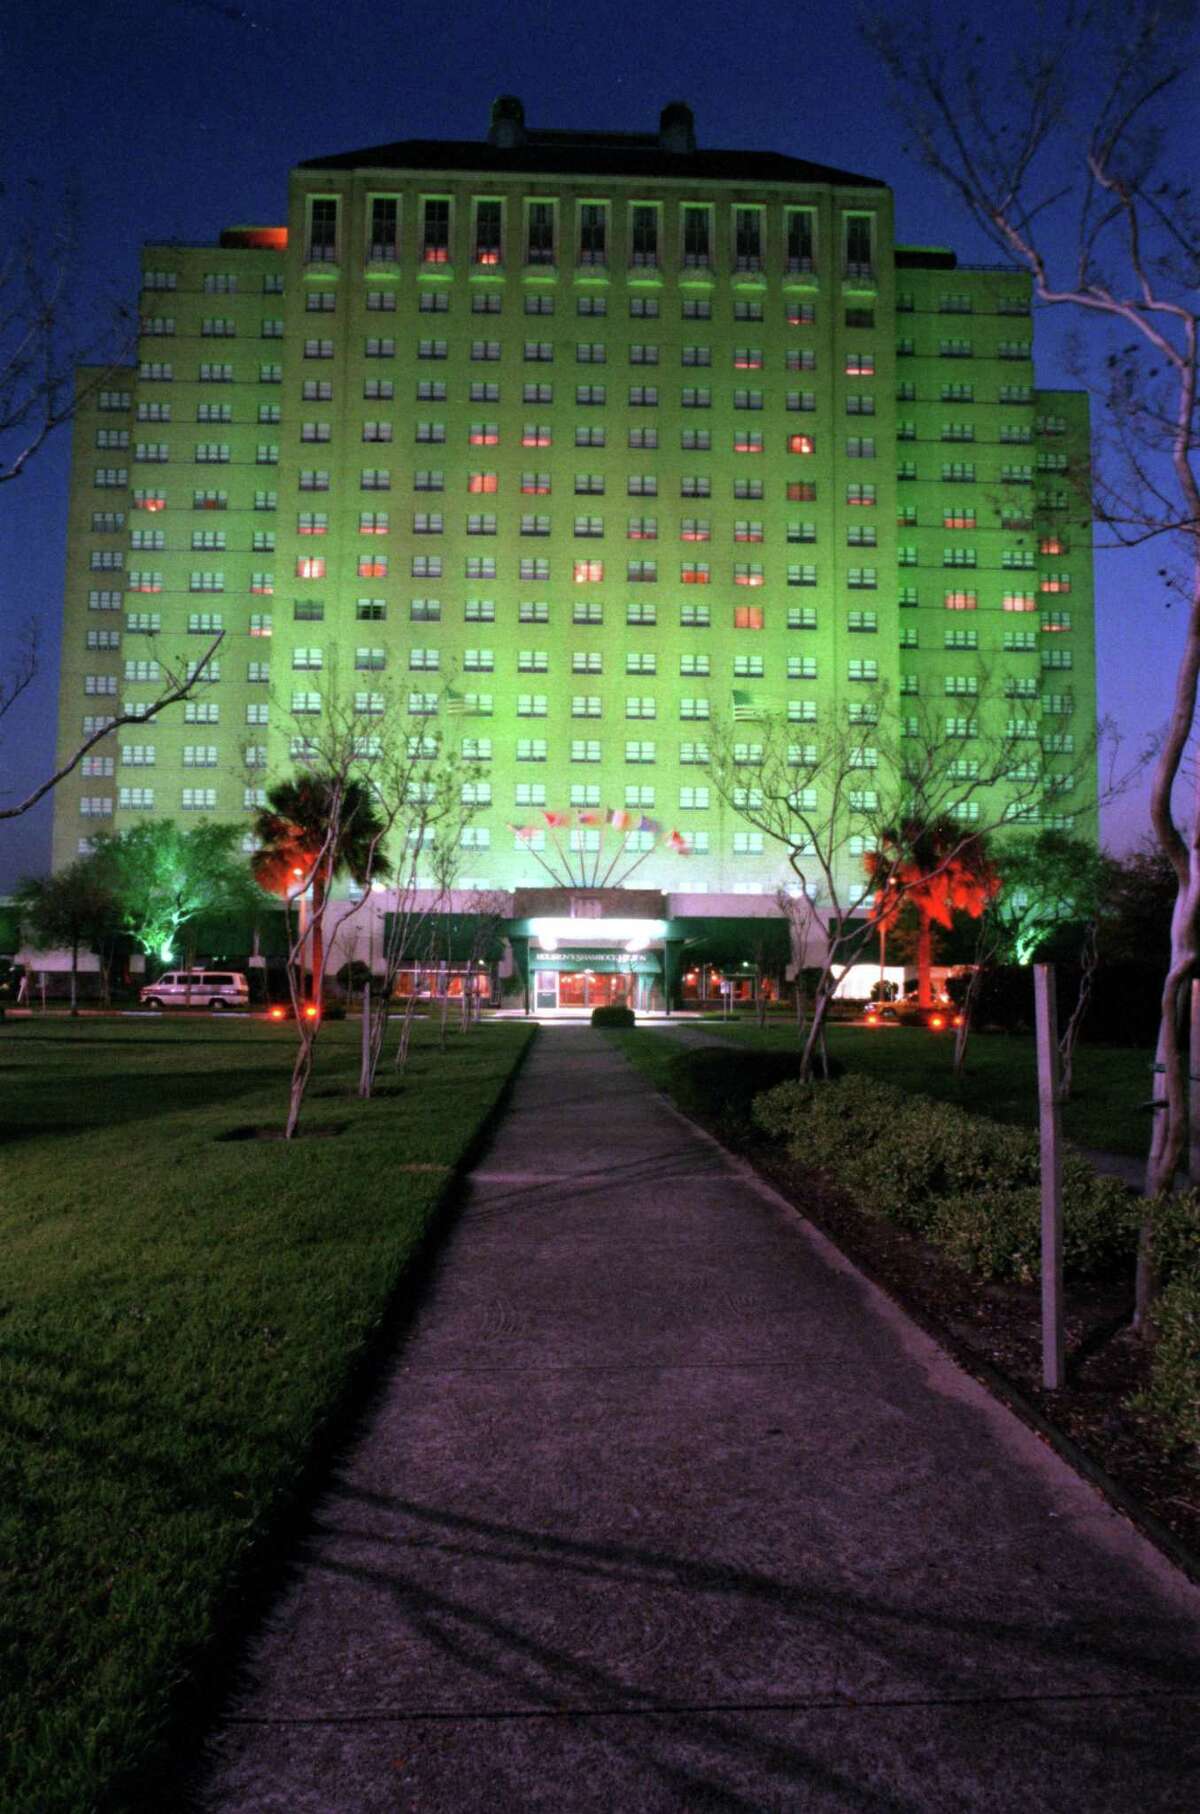 At night, the Shamrock Hotel/Shamrock Hilton was bathed in green light. It’s shown here at dusk in 1986.